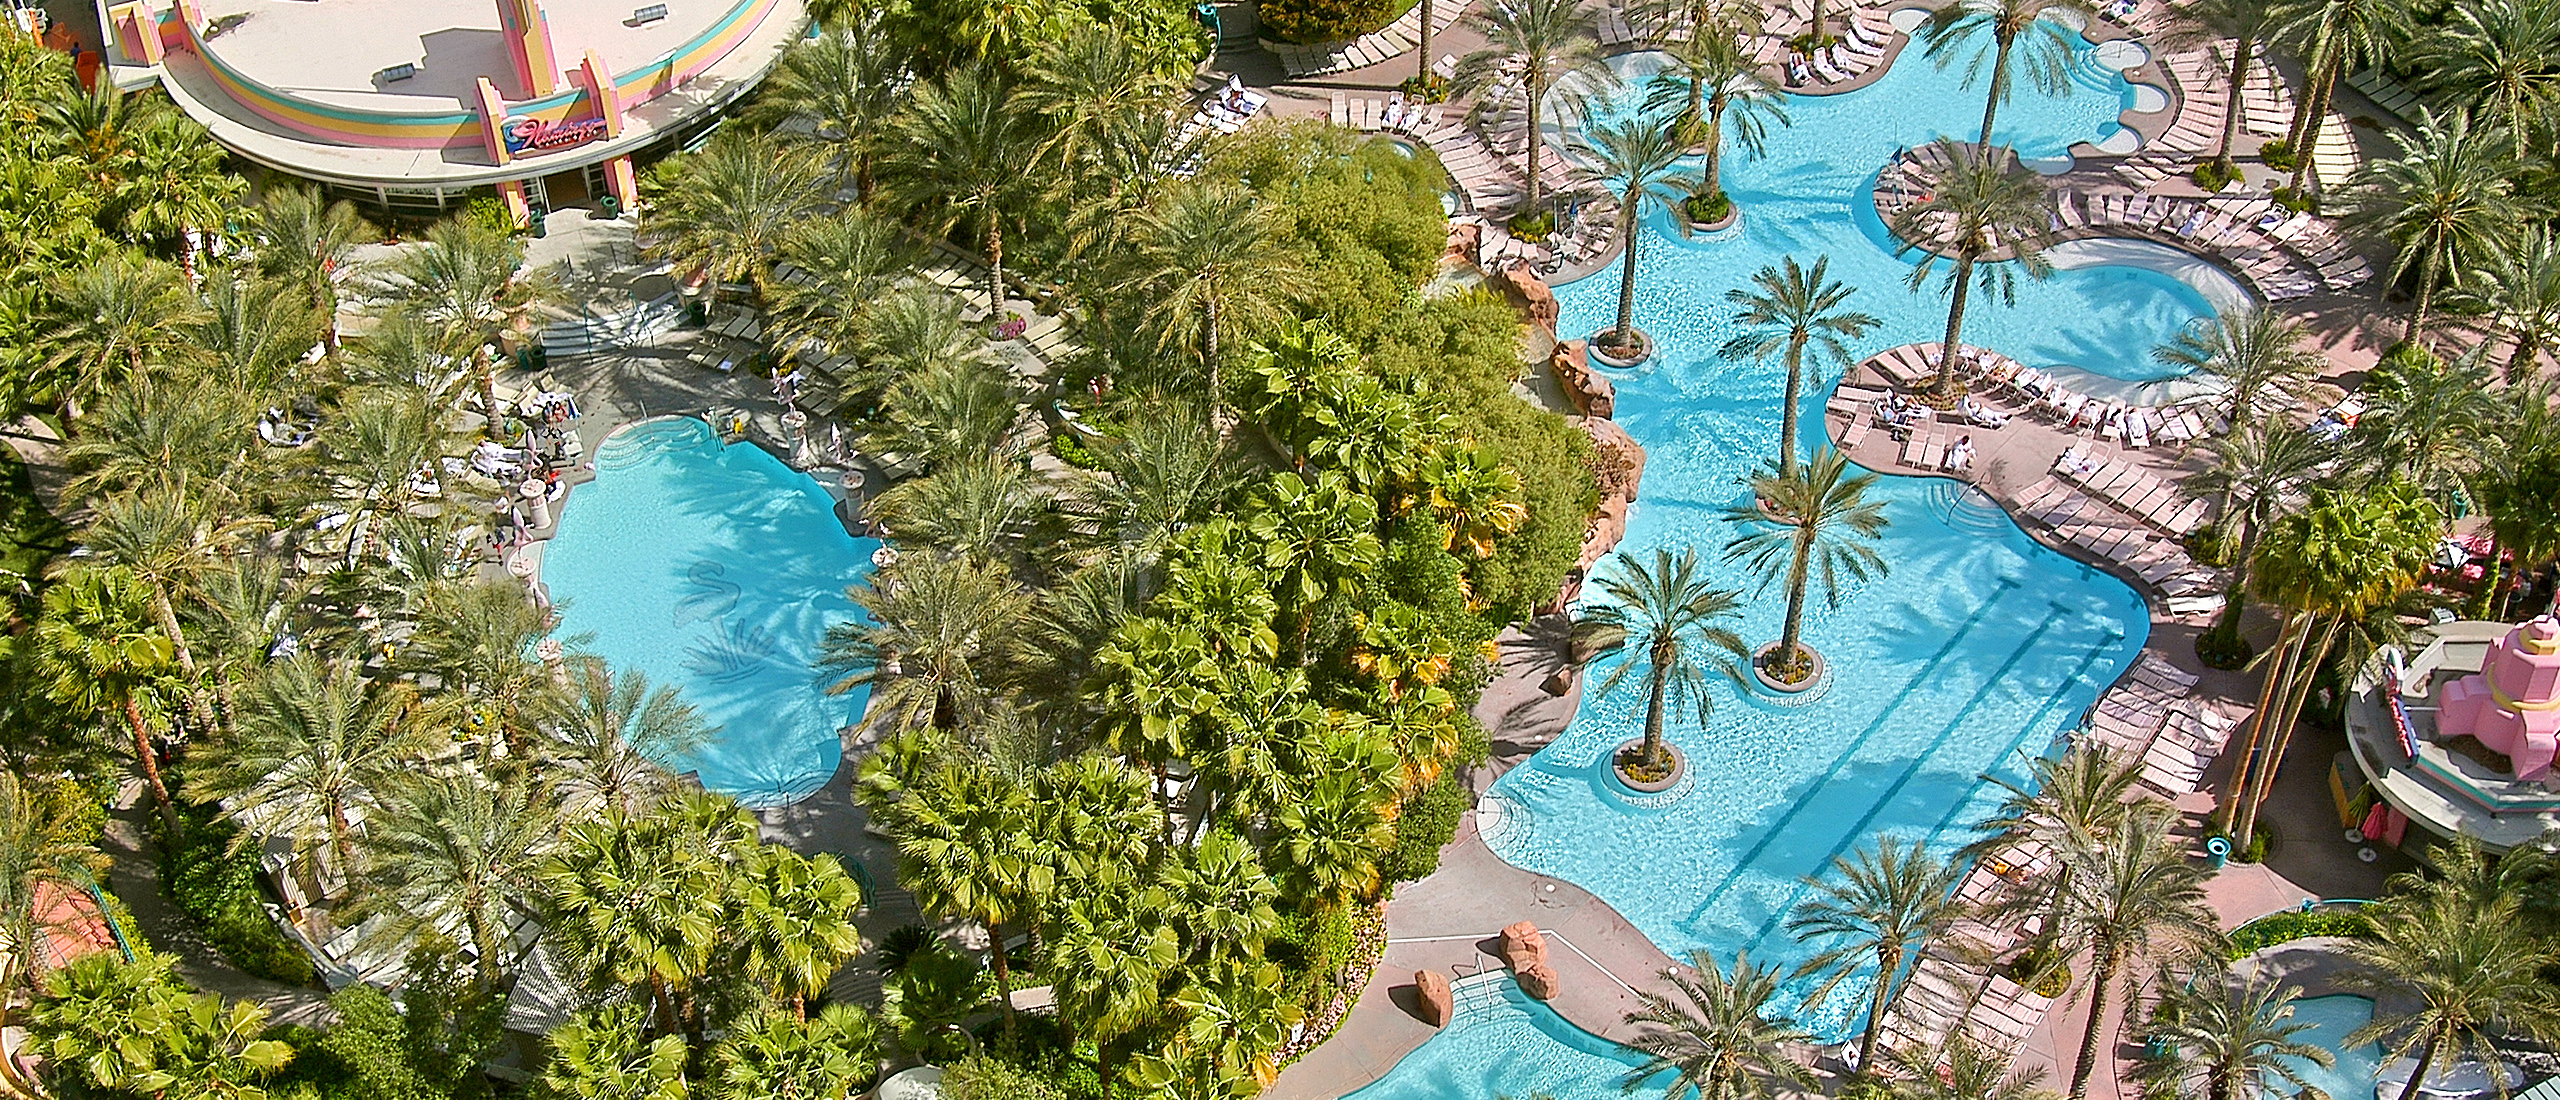 NOBU Caesars Palace - Ready for 294 days of sunlight? All Nobu Hotel guests  have access to the famed Garden of the Gods Pool Oasis at Caesars Palace.